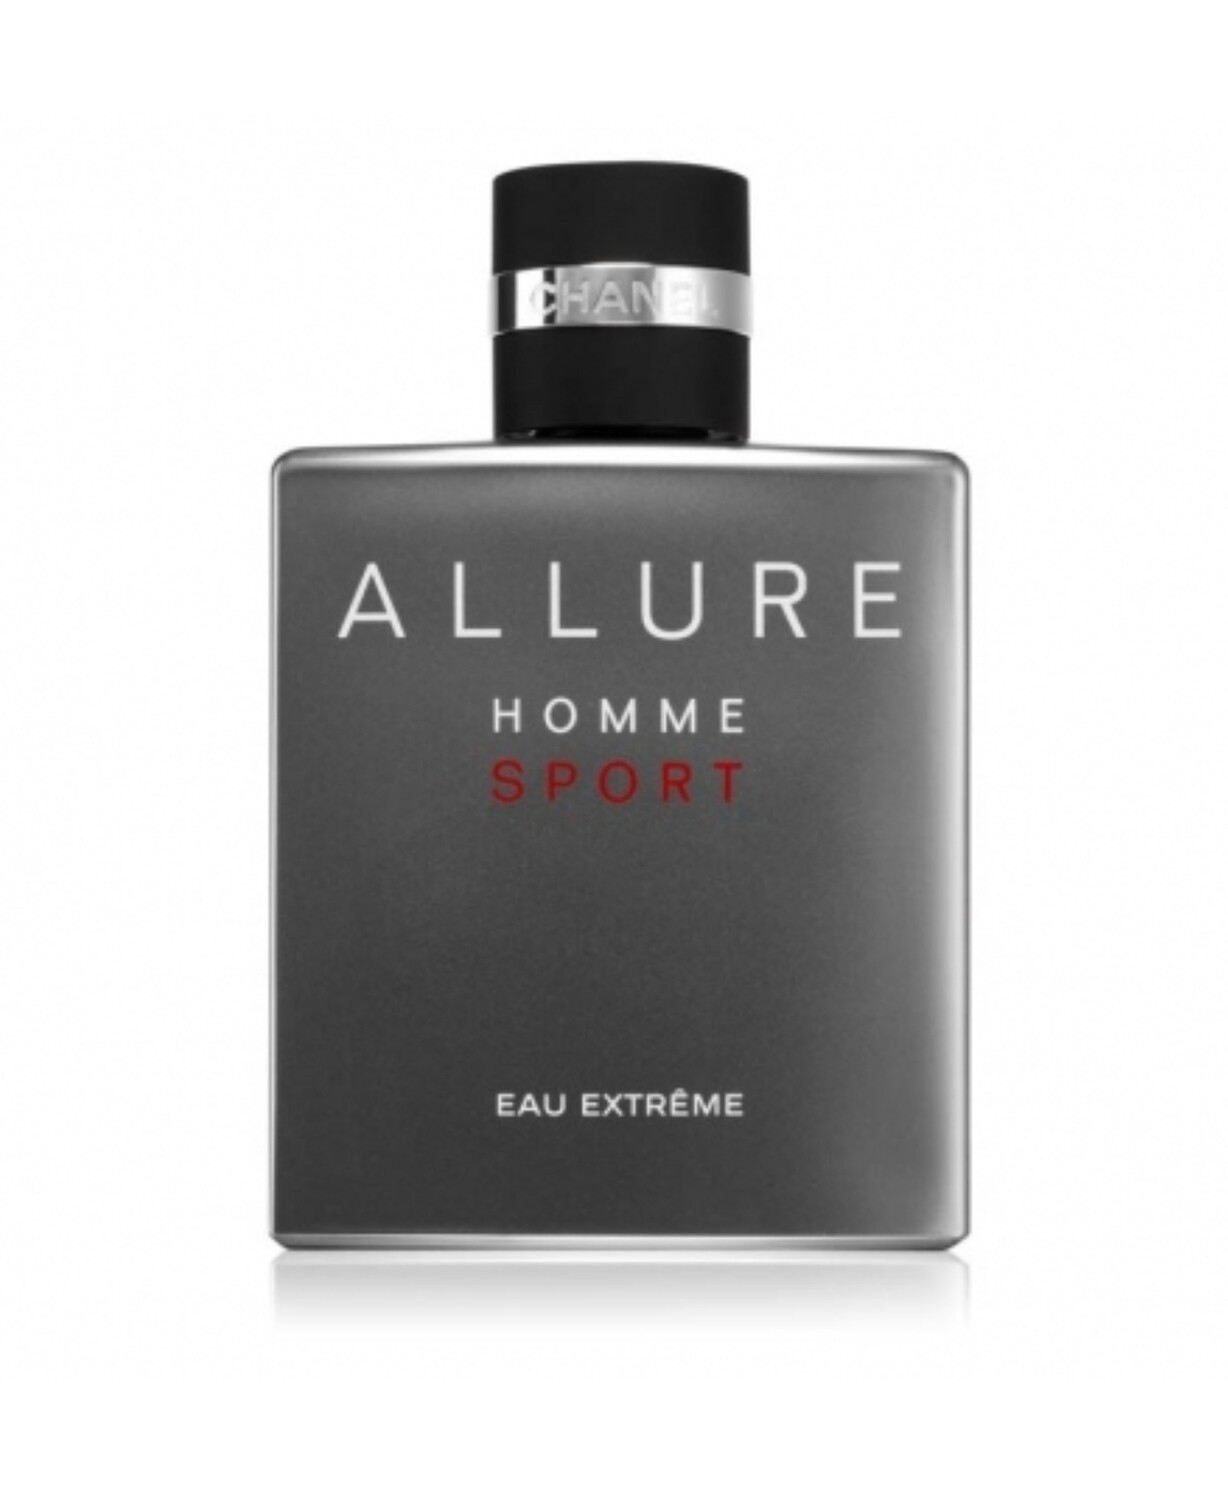 Allure Homme Sport by Chanel 100ml Eau Extreme